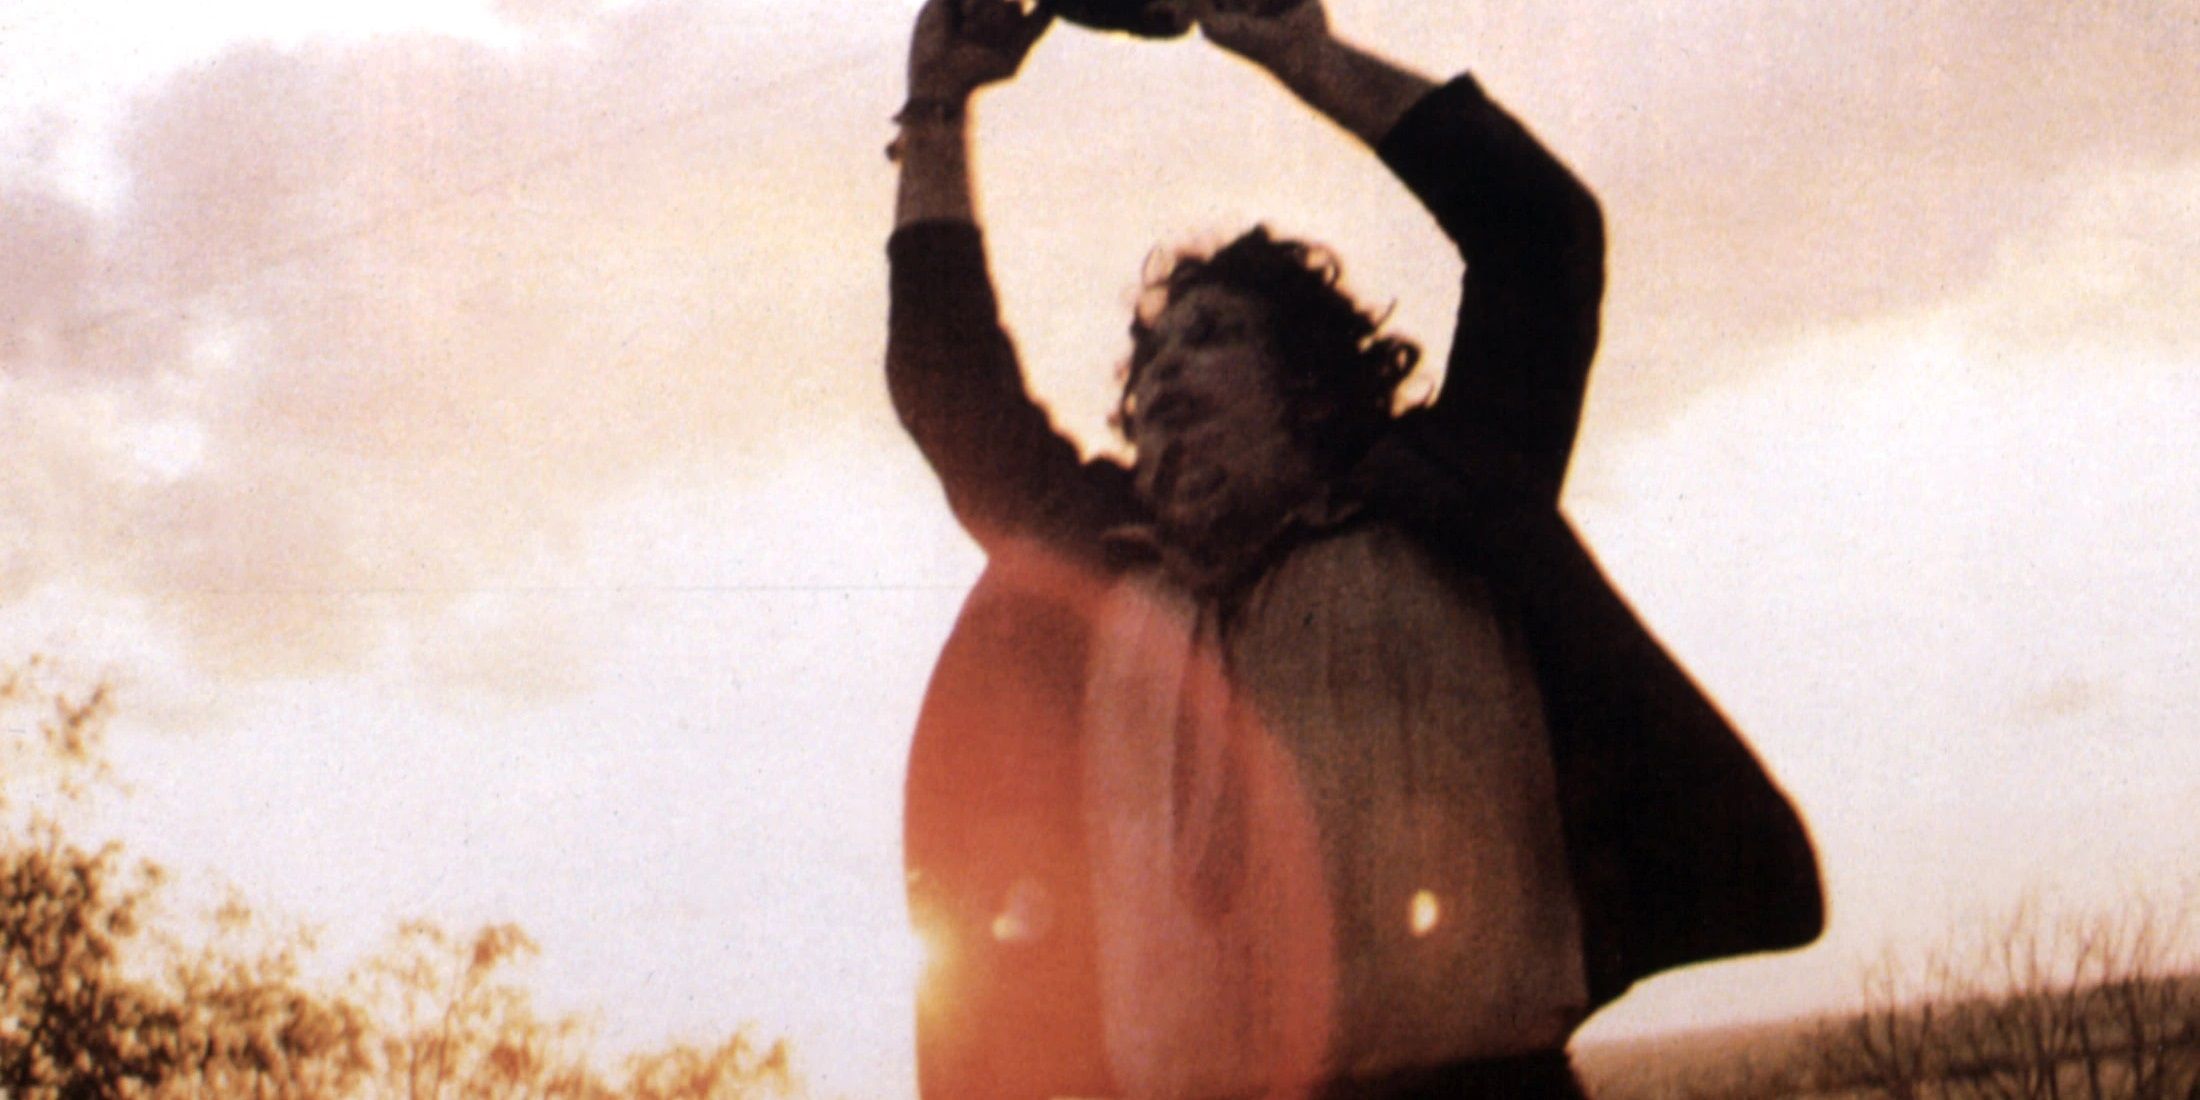 Leatherface with his chainsaw in The Texas Chain Saw Massacre